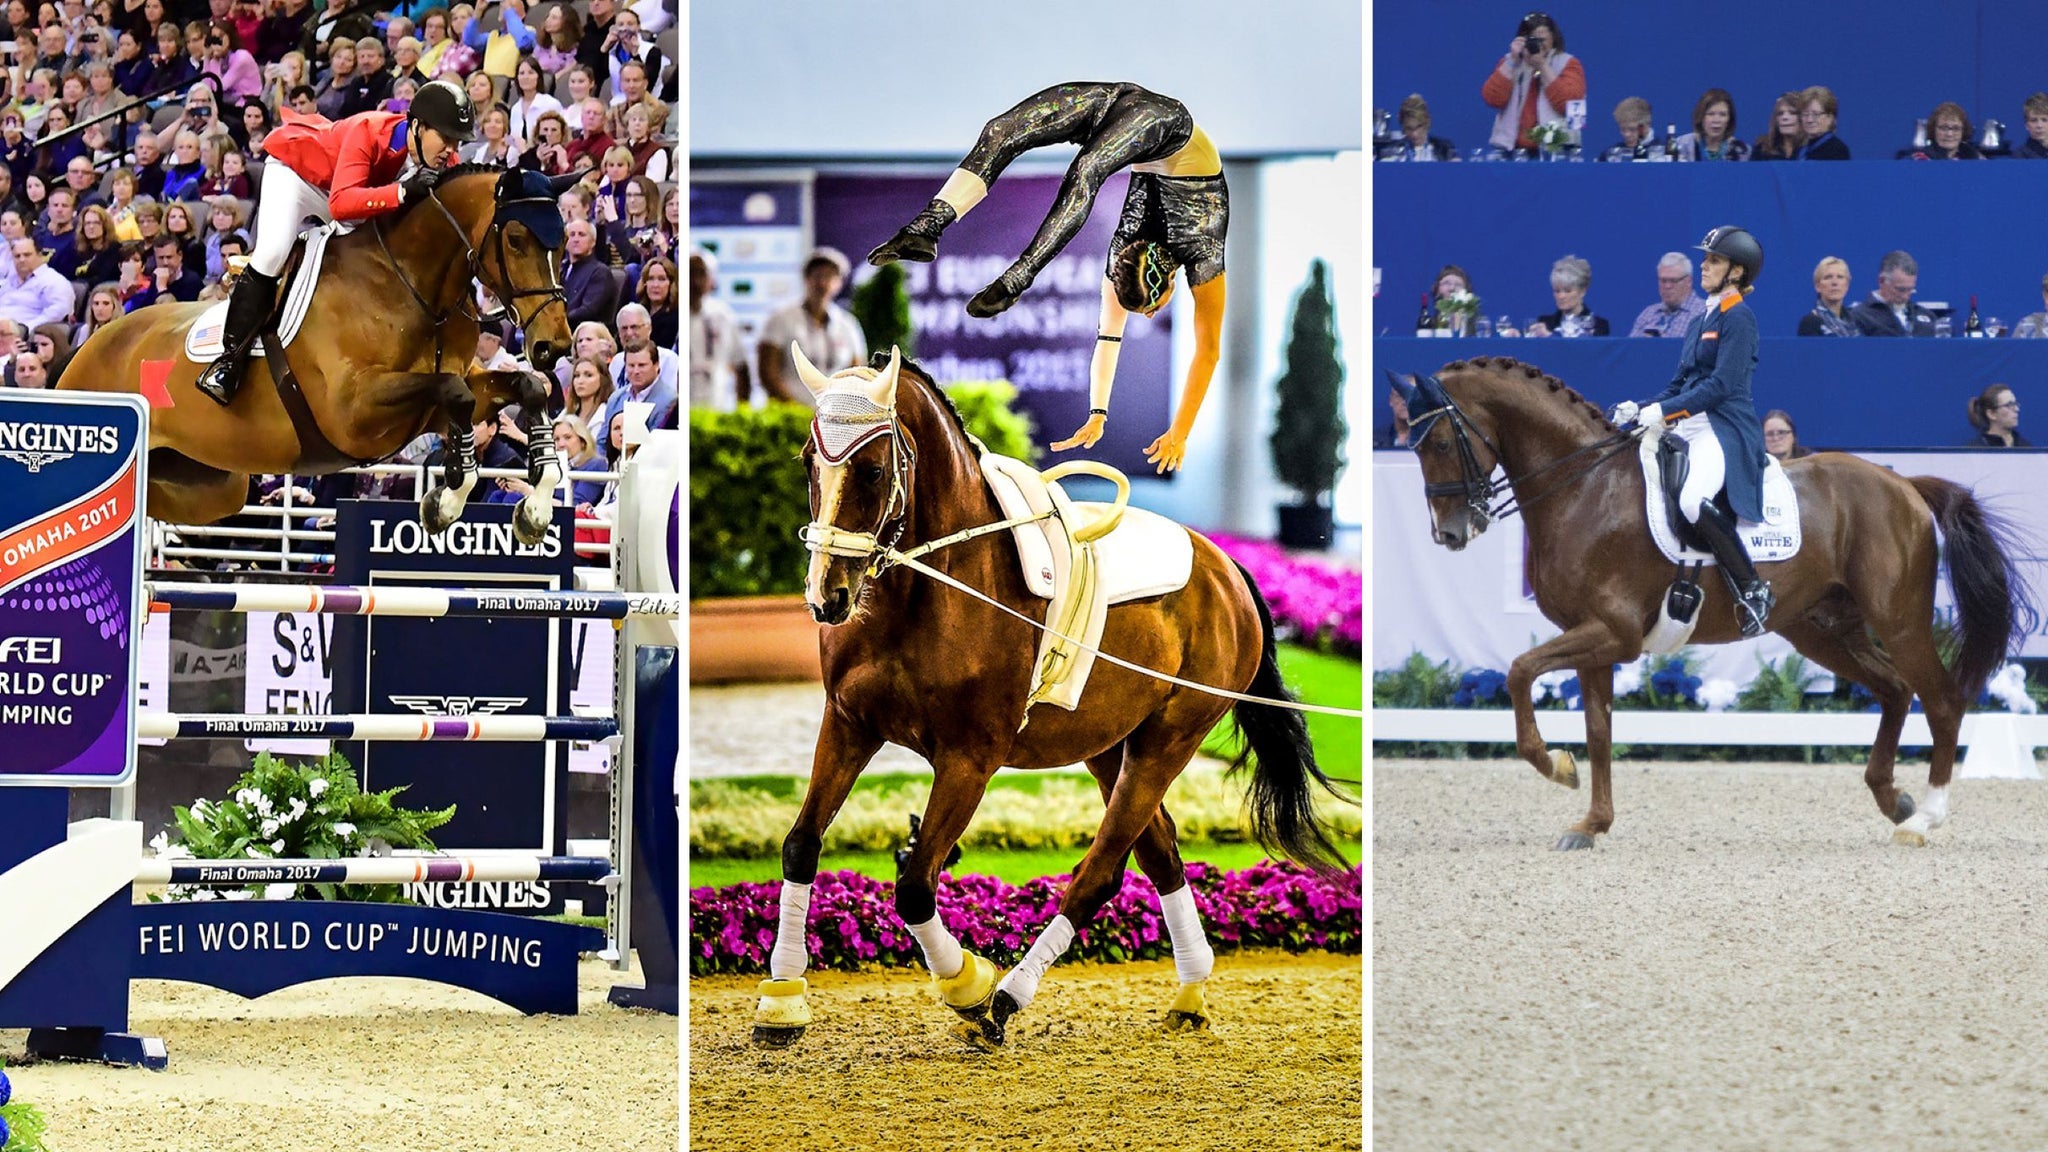 Final Round – Longines FEI Jumping World Cup(TM) Finals